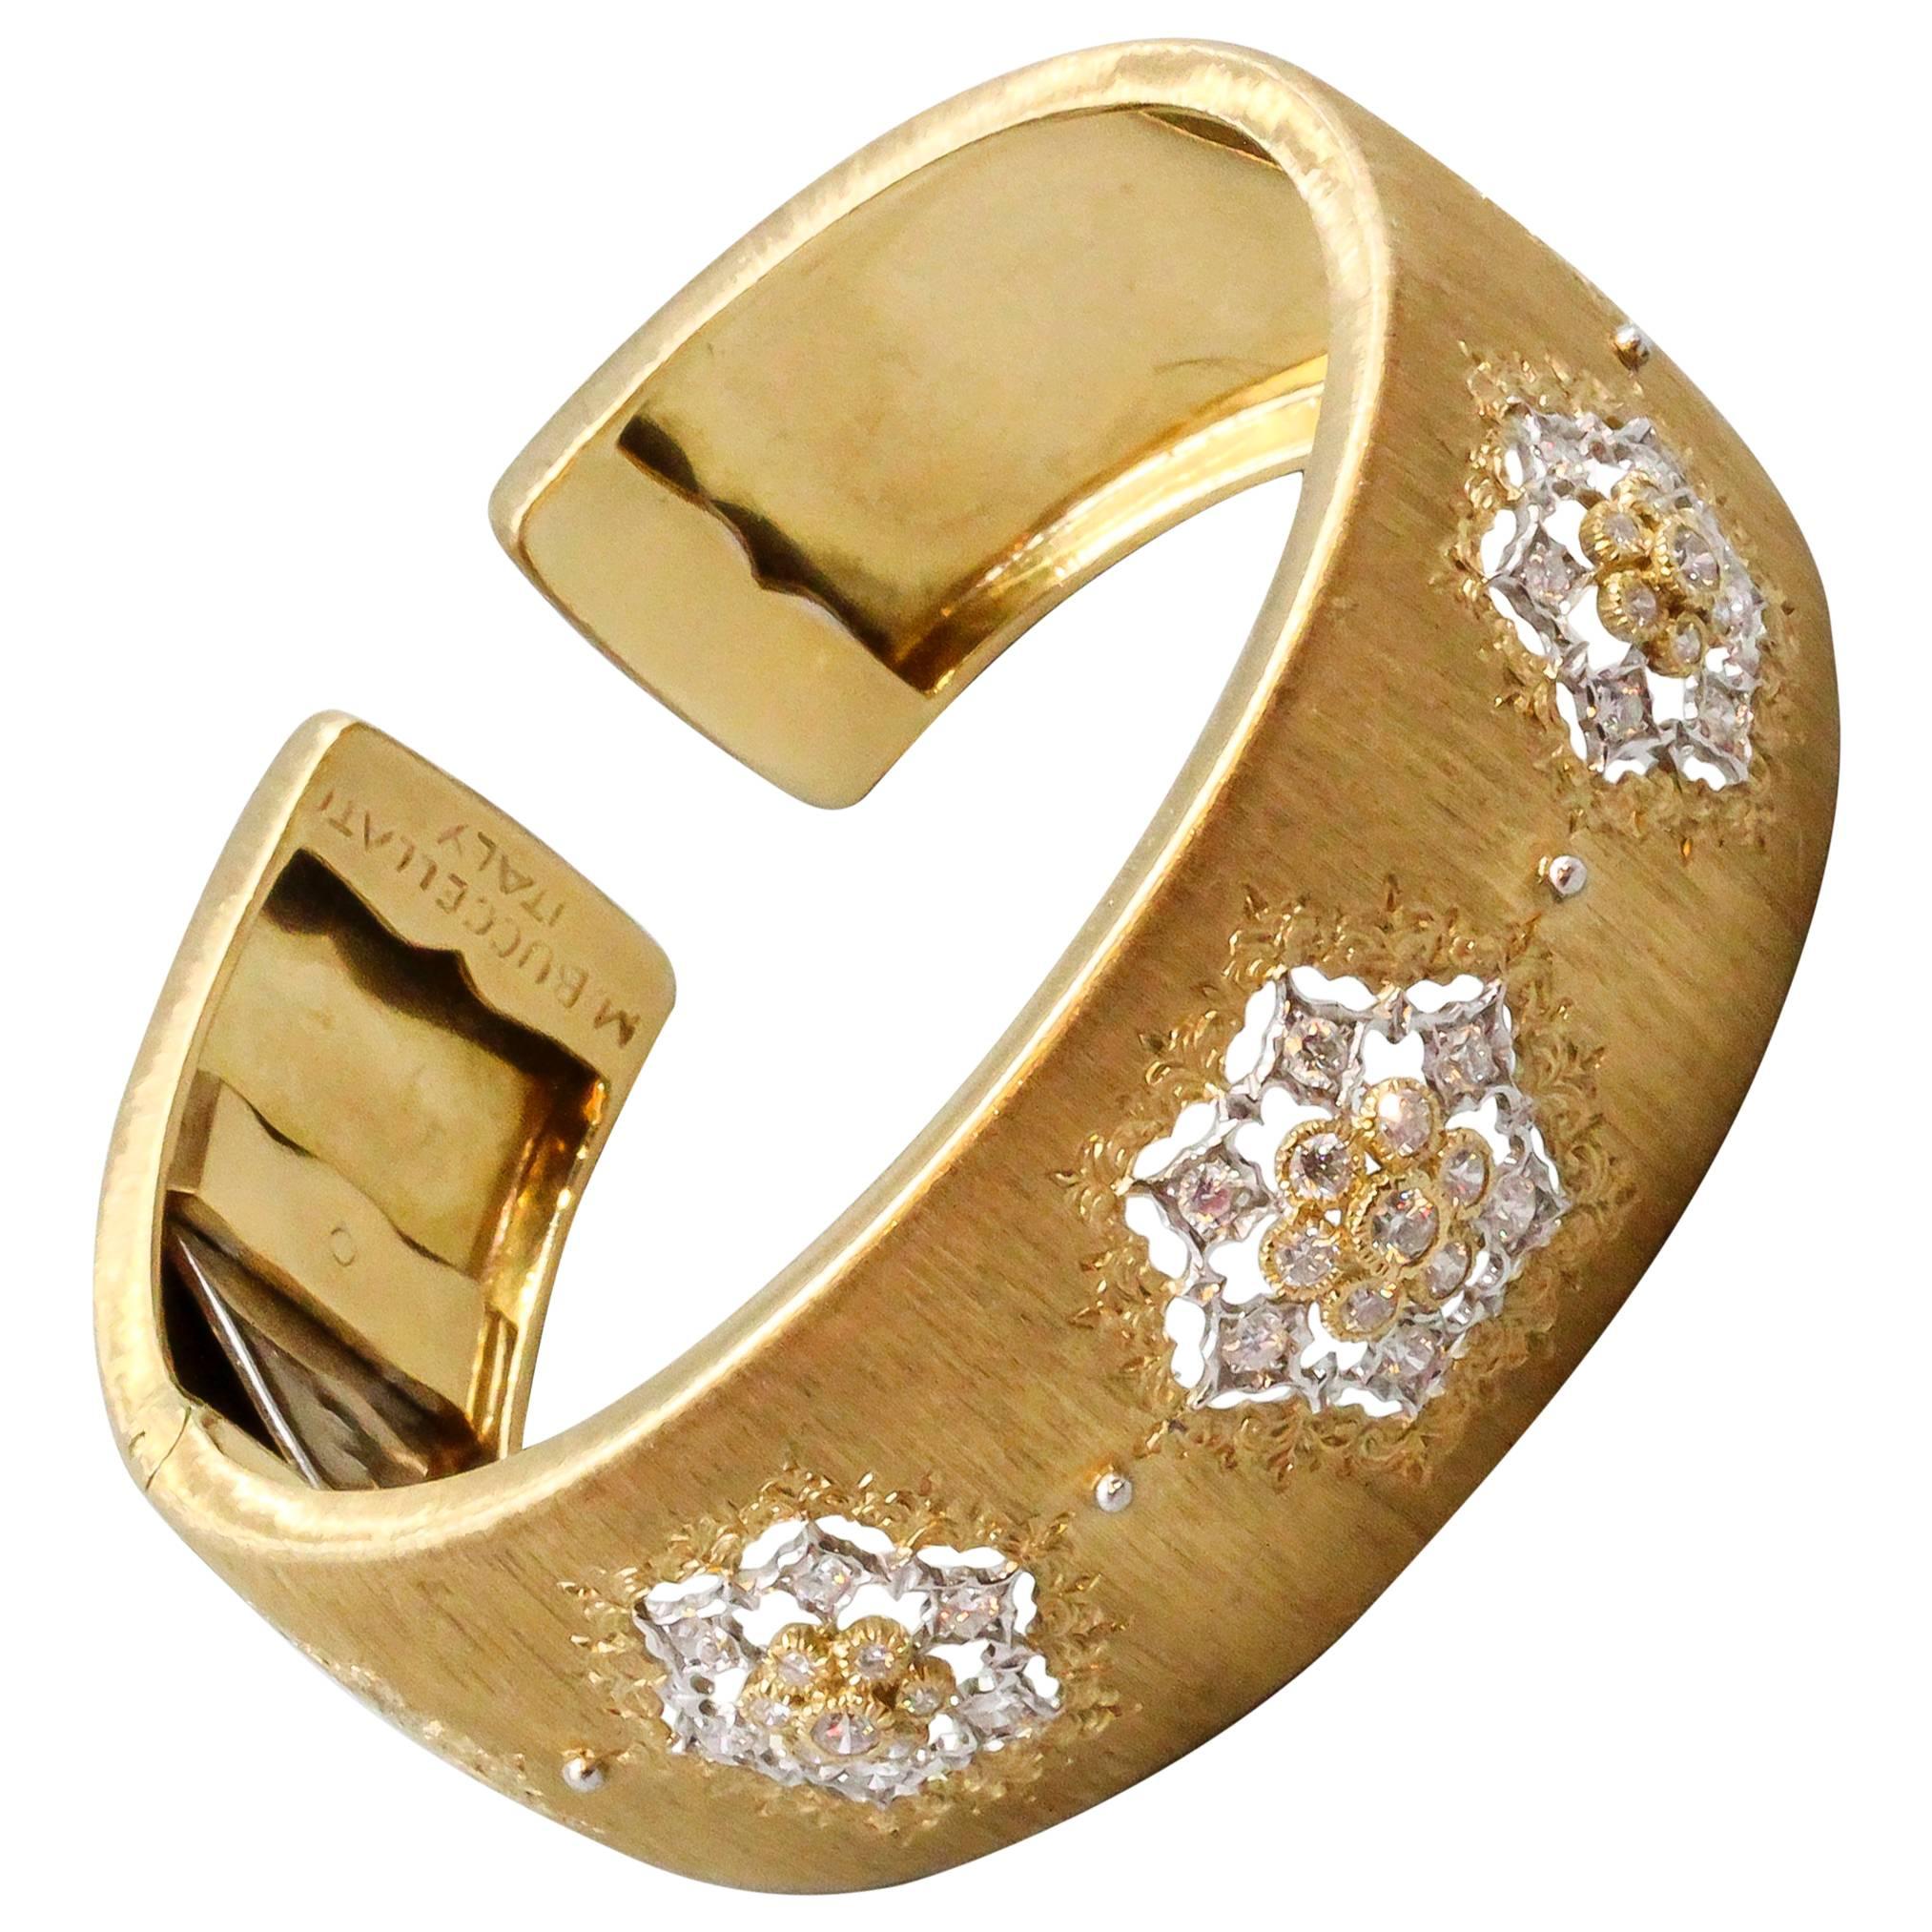 Timeless diamond and 18K yellow gold wide cuff bracelet by Mario Buccellati. It features high grade round brilliant cut diamonds along with their trademark lattice style gold design with the signature Florentine satin-like finish. Expert workmanship